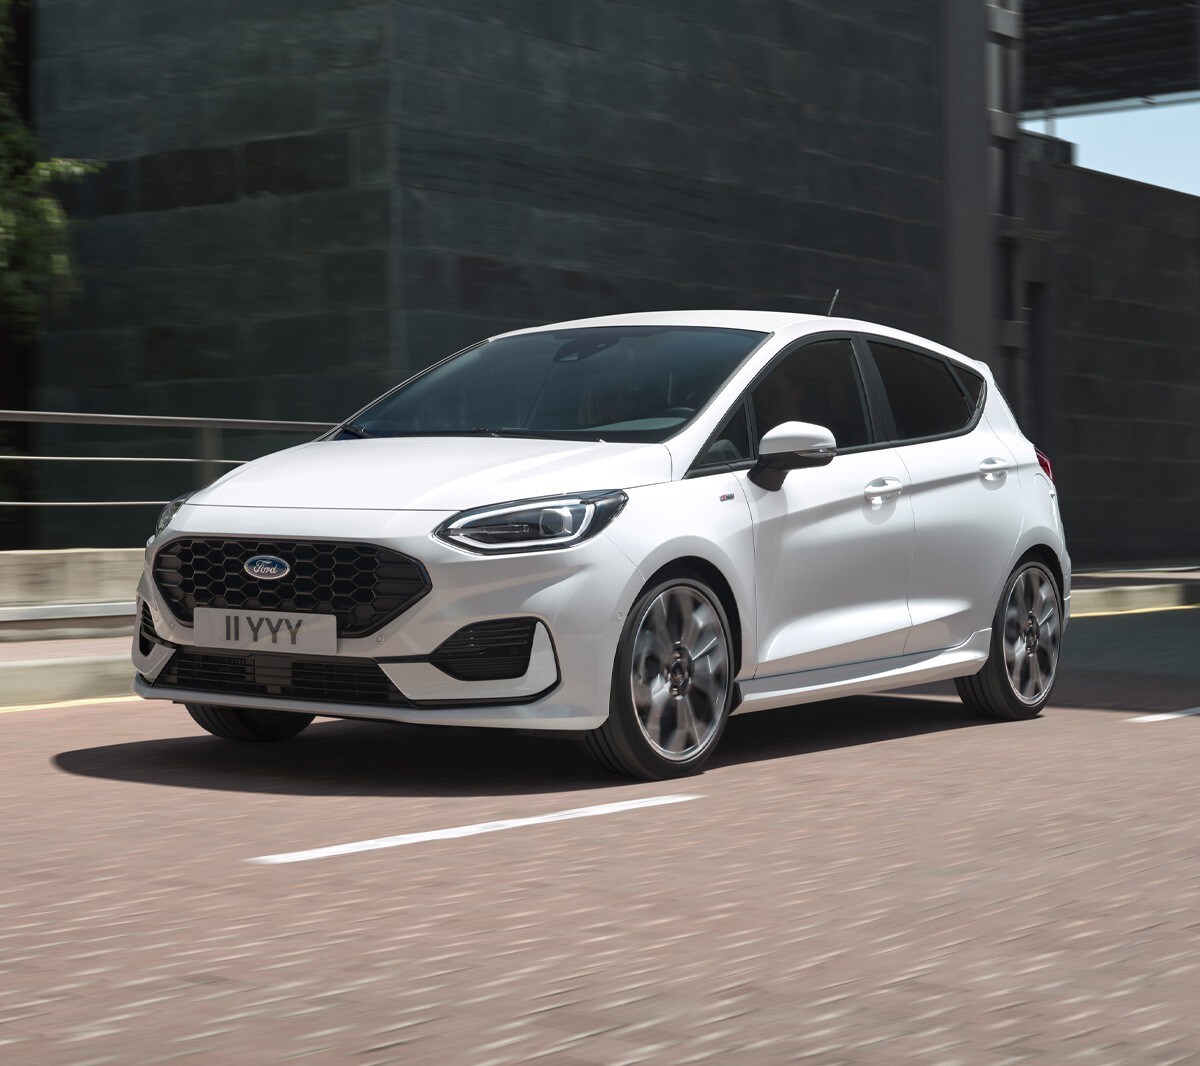 Ford Fiesta front three quarter view